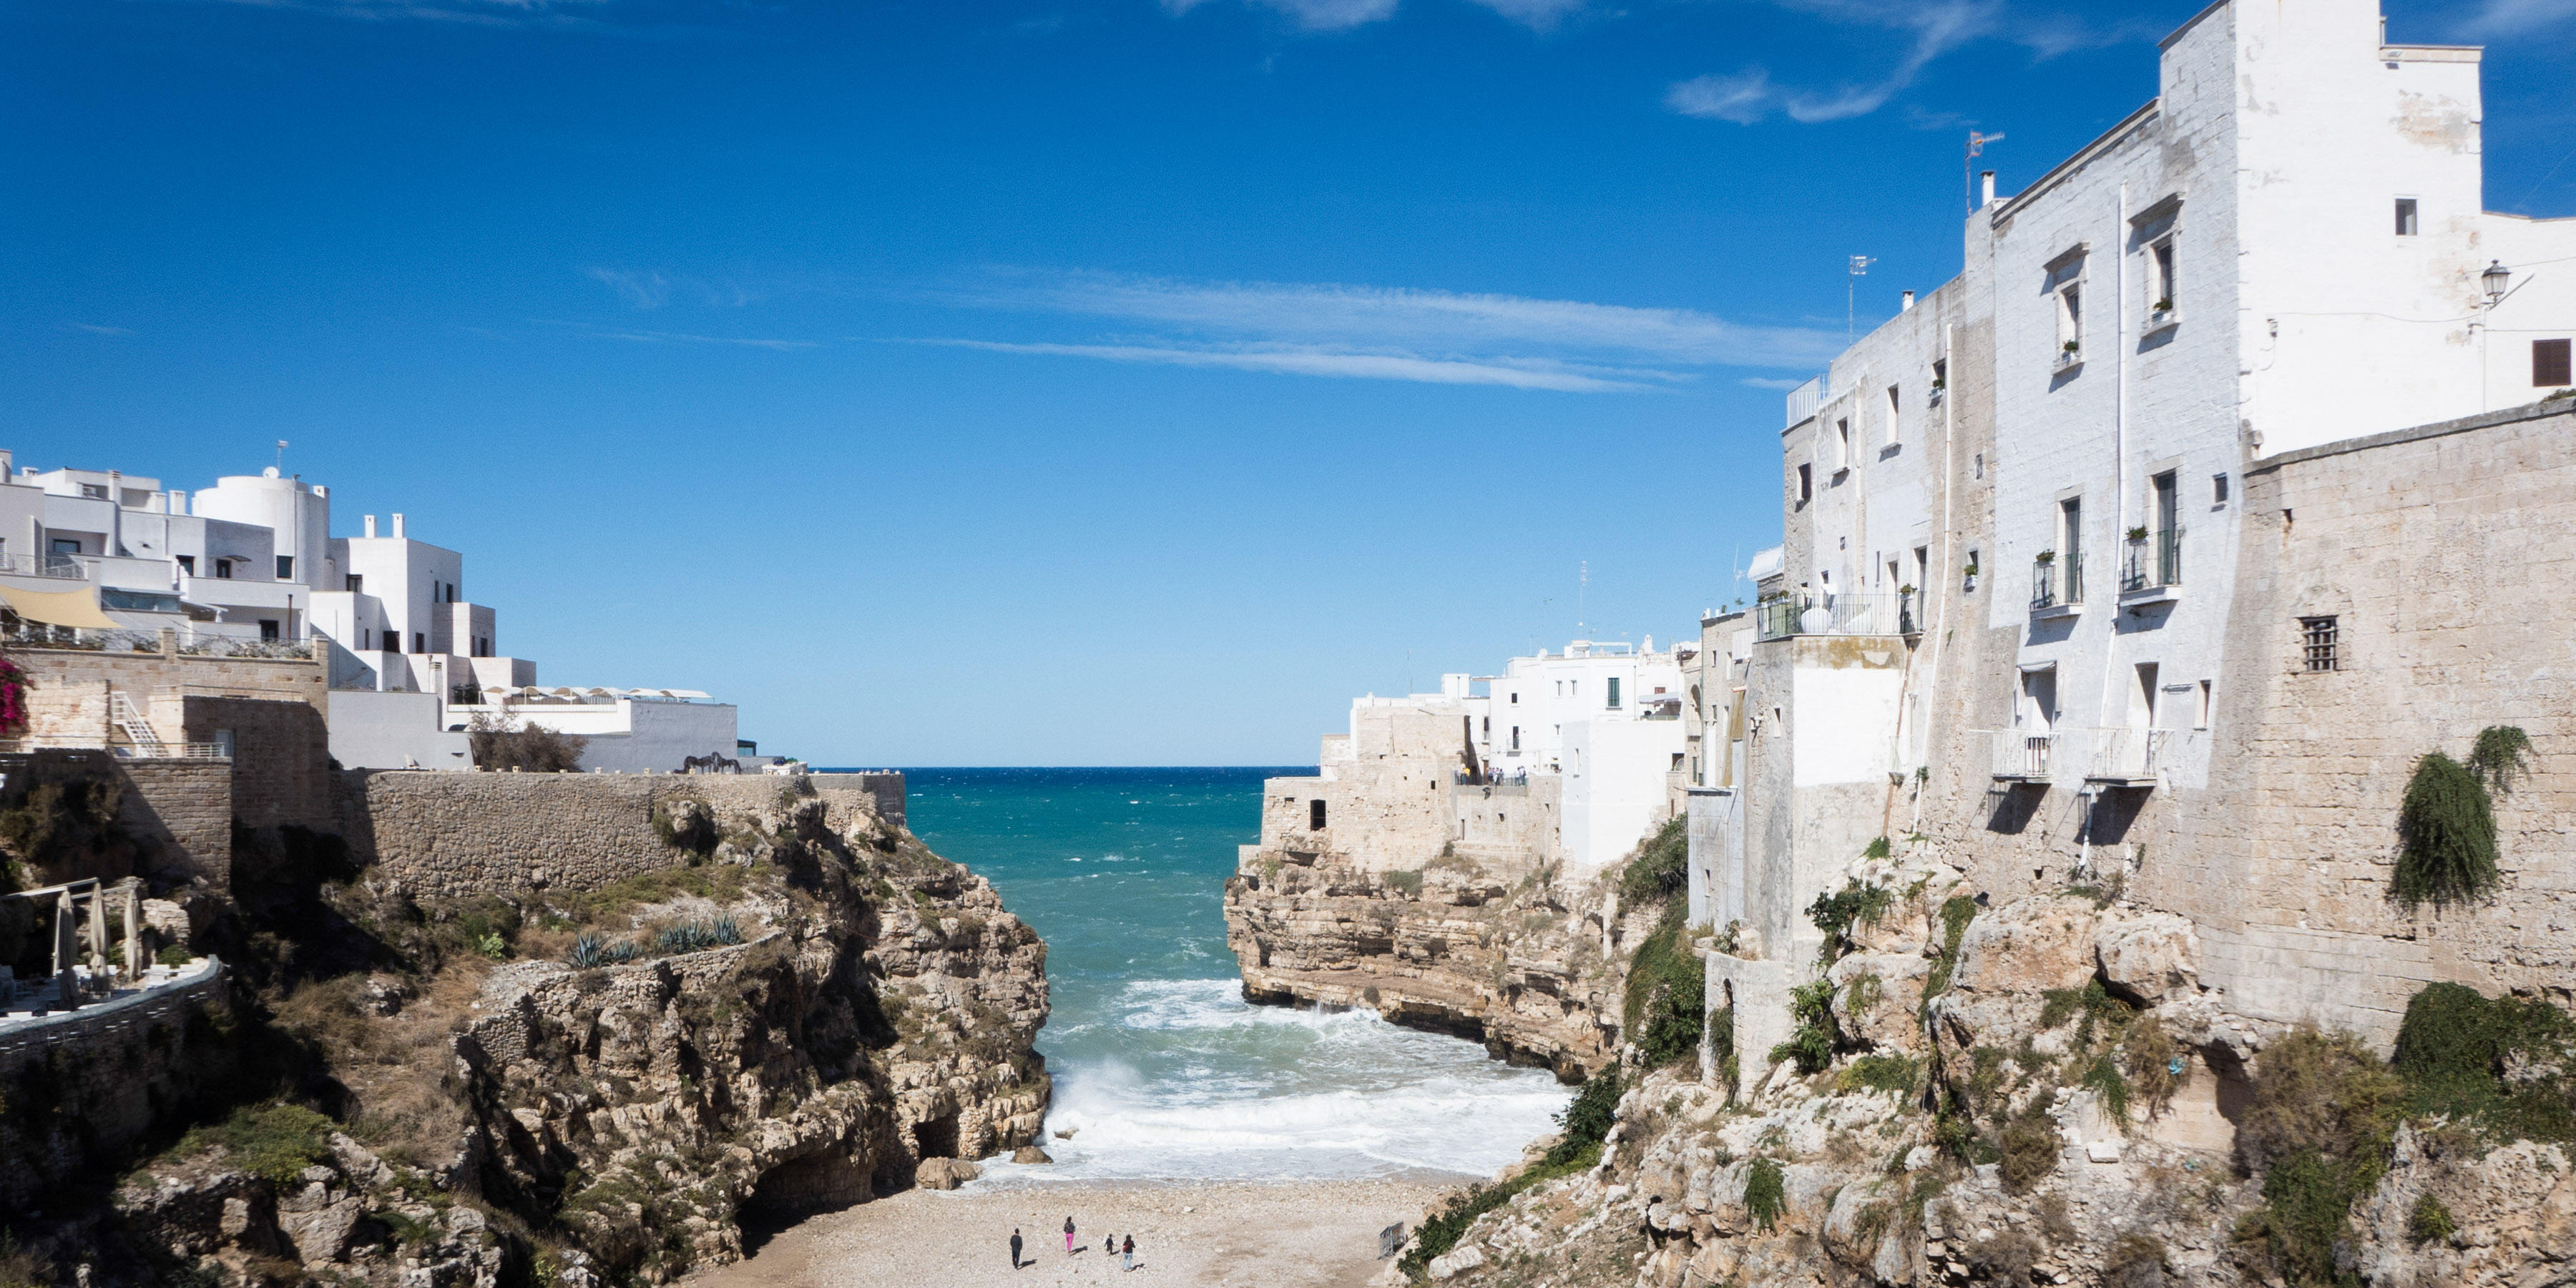 Bike Across Southern Italy rides by the gorgeous Polignano Seaside